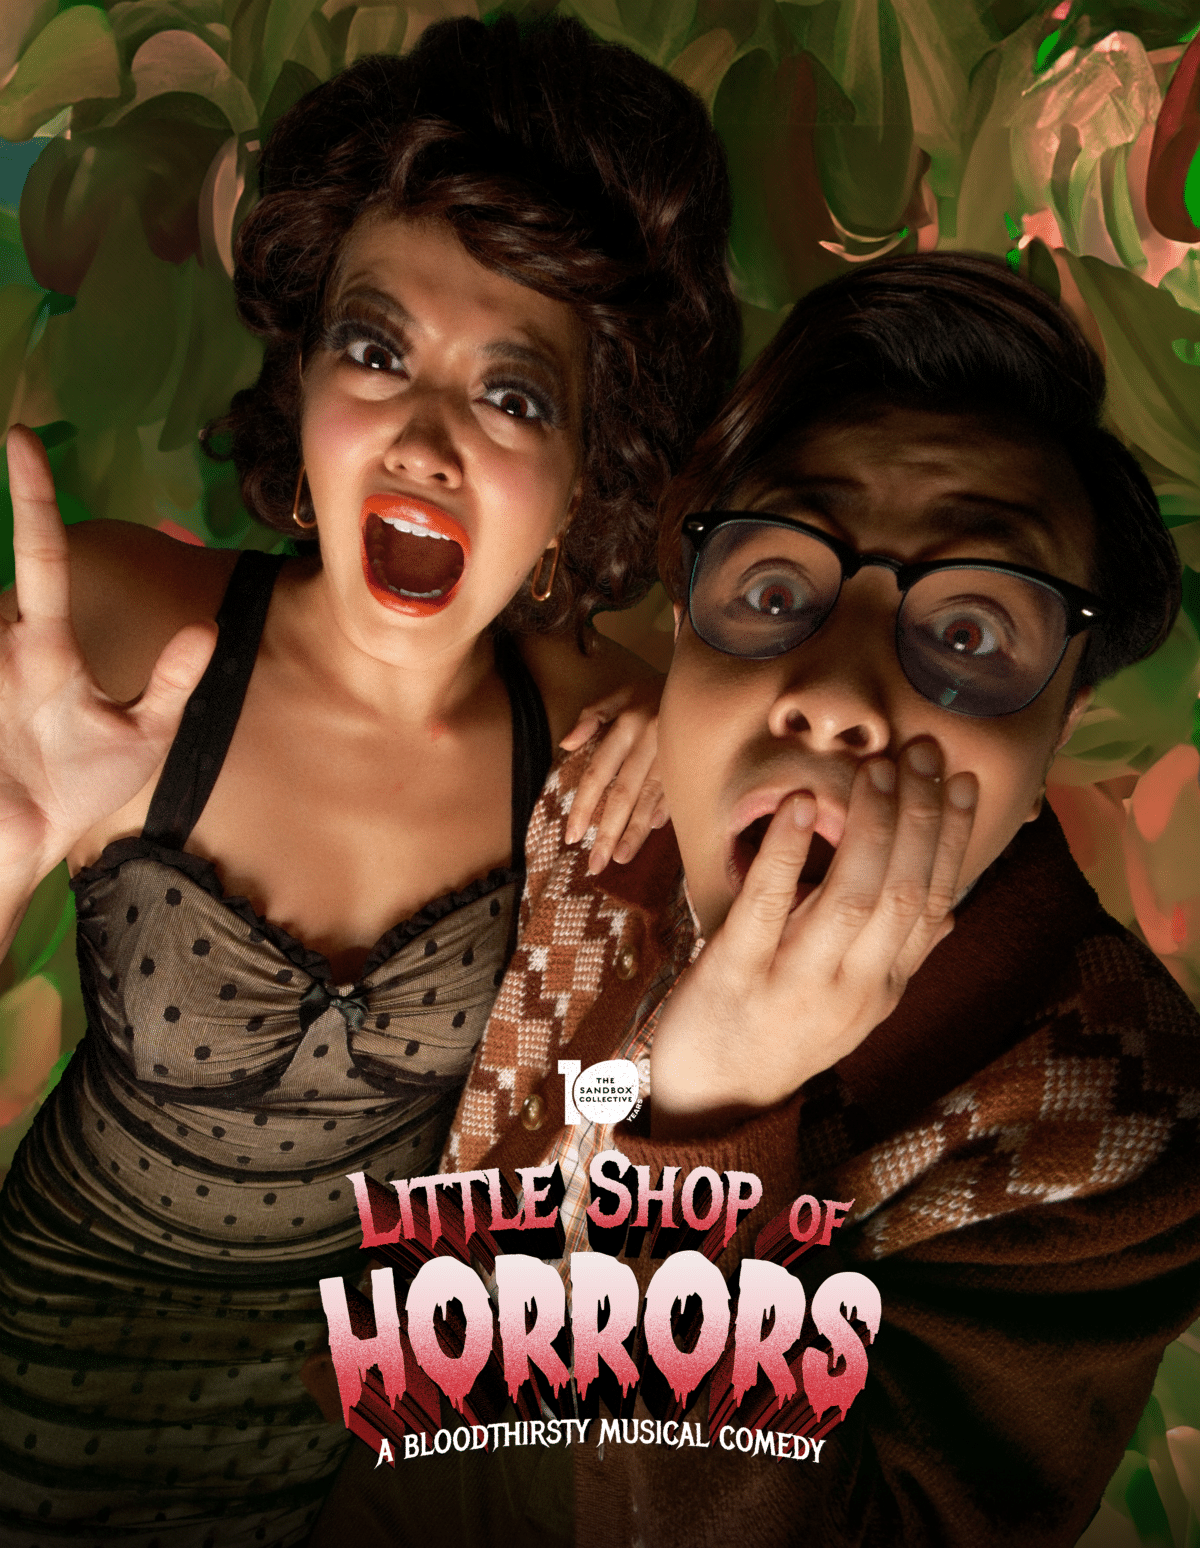 Sue Ramirez and Reb Atadero in a promo photo for "Little Shop of Horrors." Image: Courtesy of The Sandbox Collective